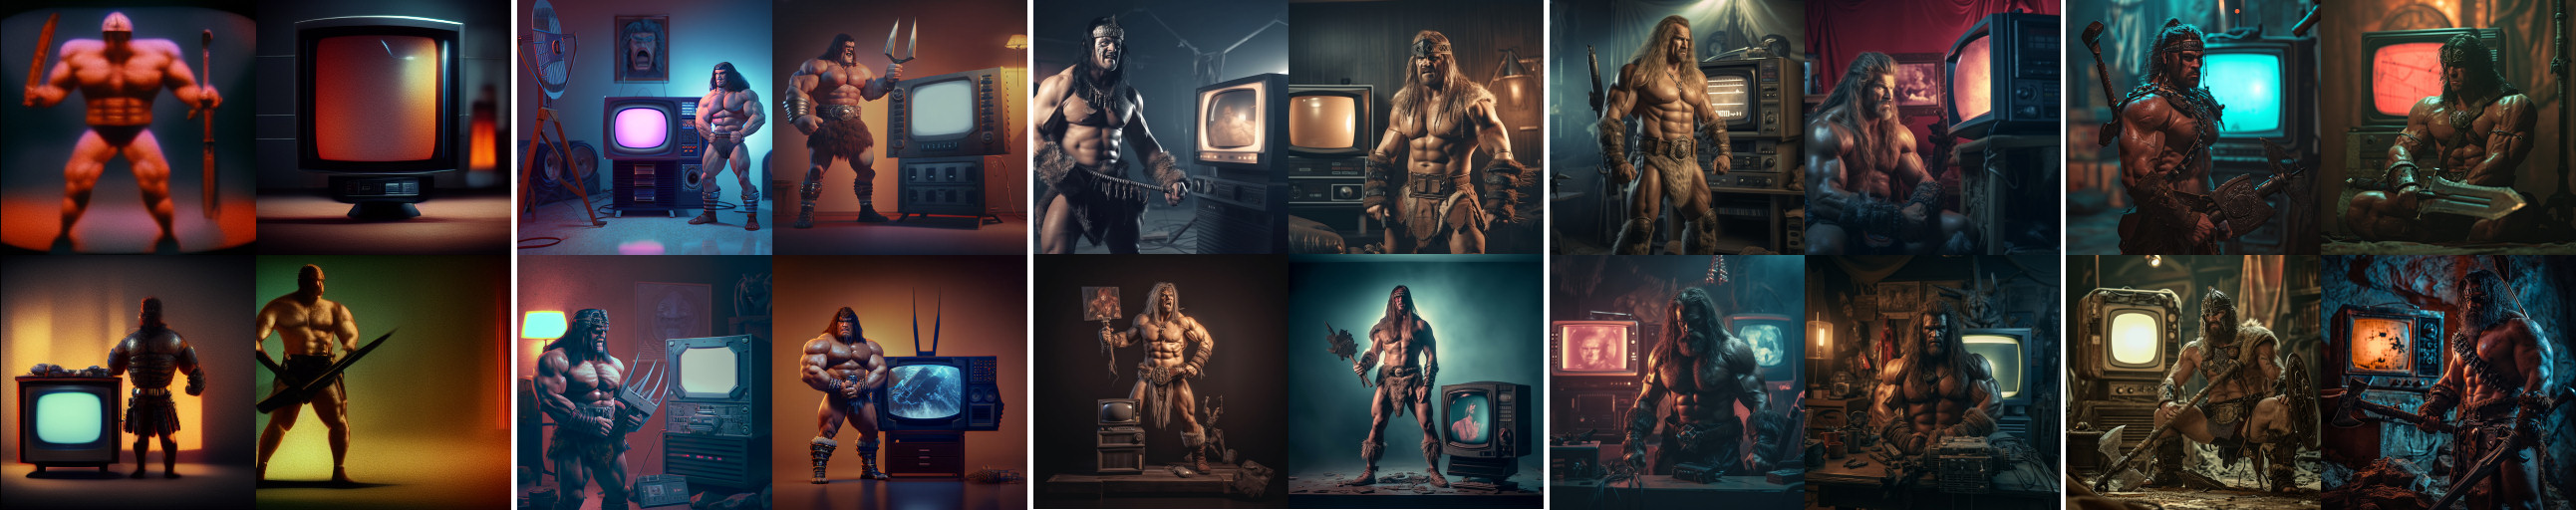 A comparison between output from Midjourney versions (from left to right: v3, v4, v5, v5.2, v6) with the prompt a muscular barbarian with weapons beside a CRT television set, cinematic, 8K, studio lighting.